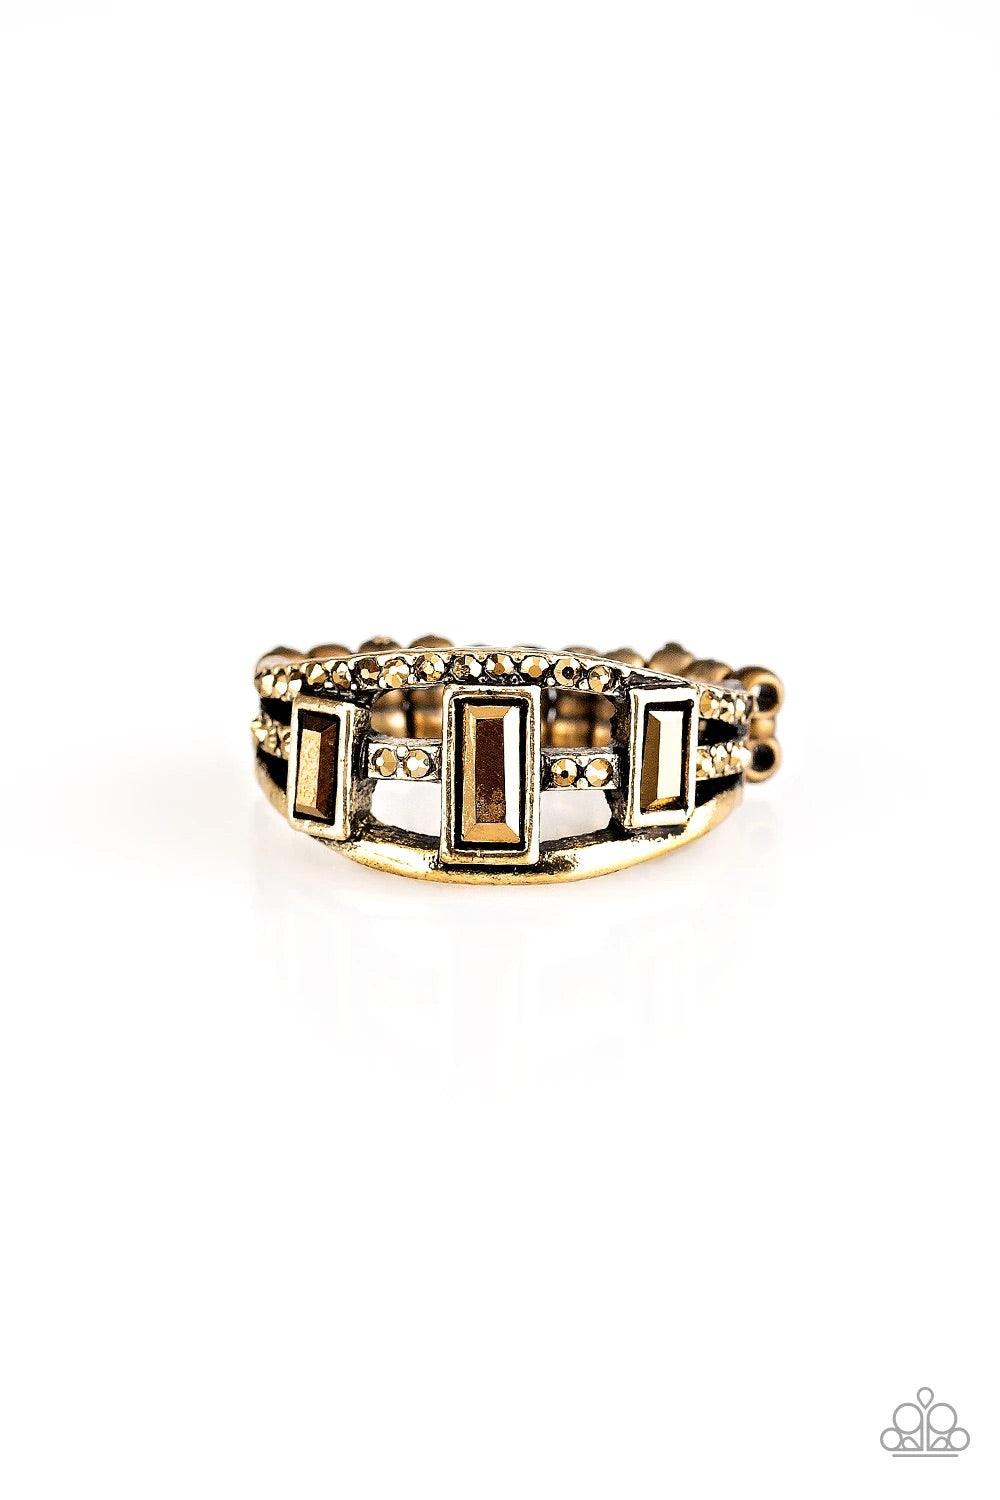 Paparazzi Accessories Noble Nova - Brass Three aurum emerald-cut rhinestones are encrusted along three brass bands radiating with smooth surfaces and sections of glittery aurum rhinestones for an edgy fashion. Features a stretchy band for a flexible fit.